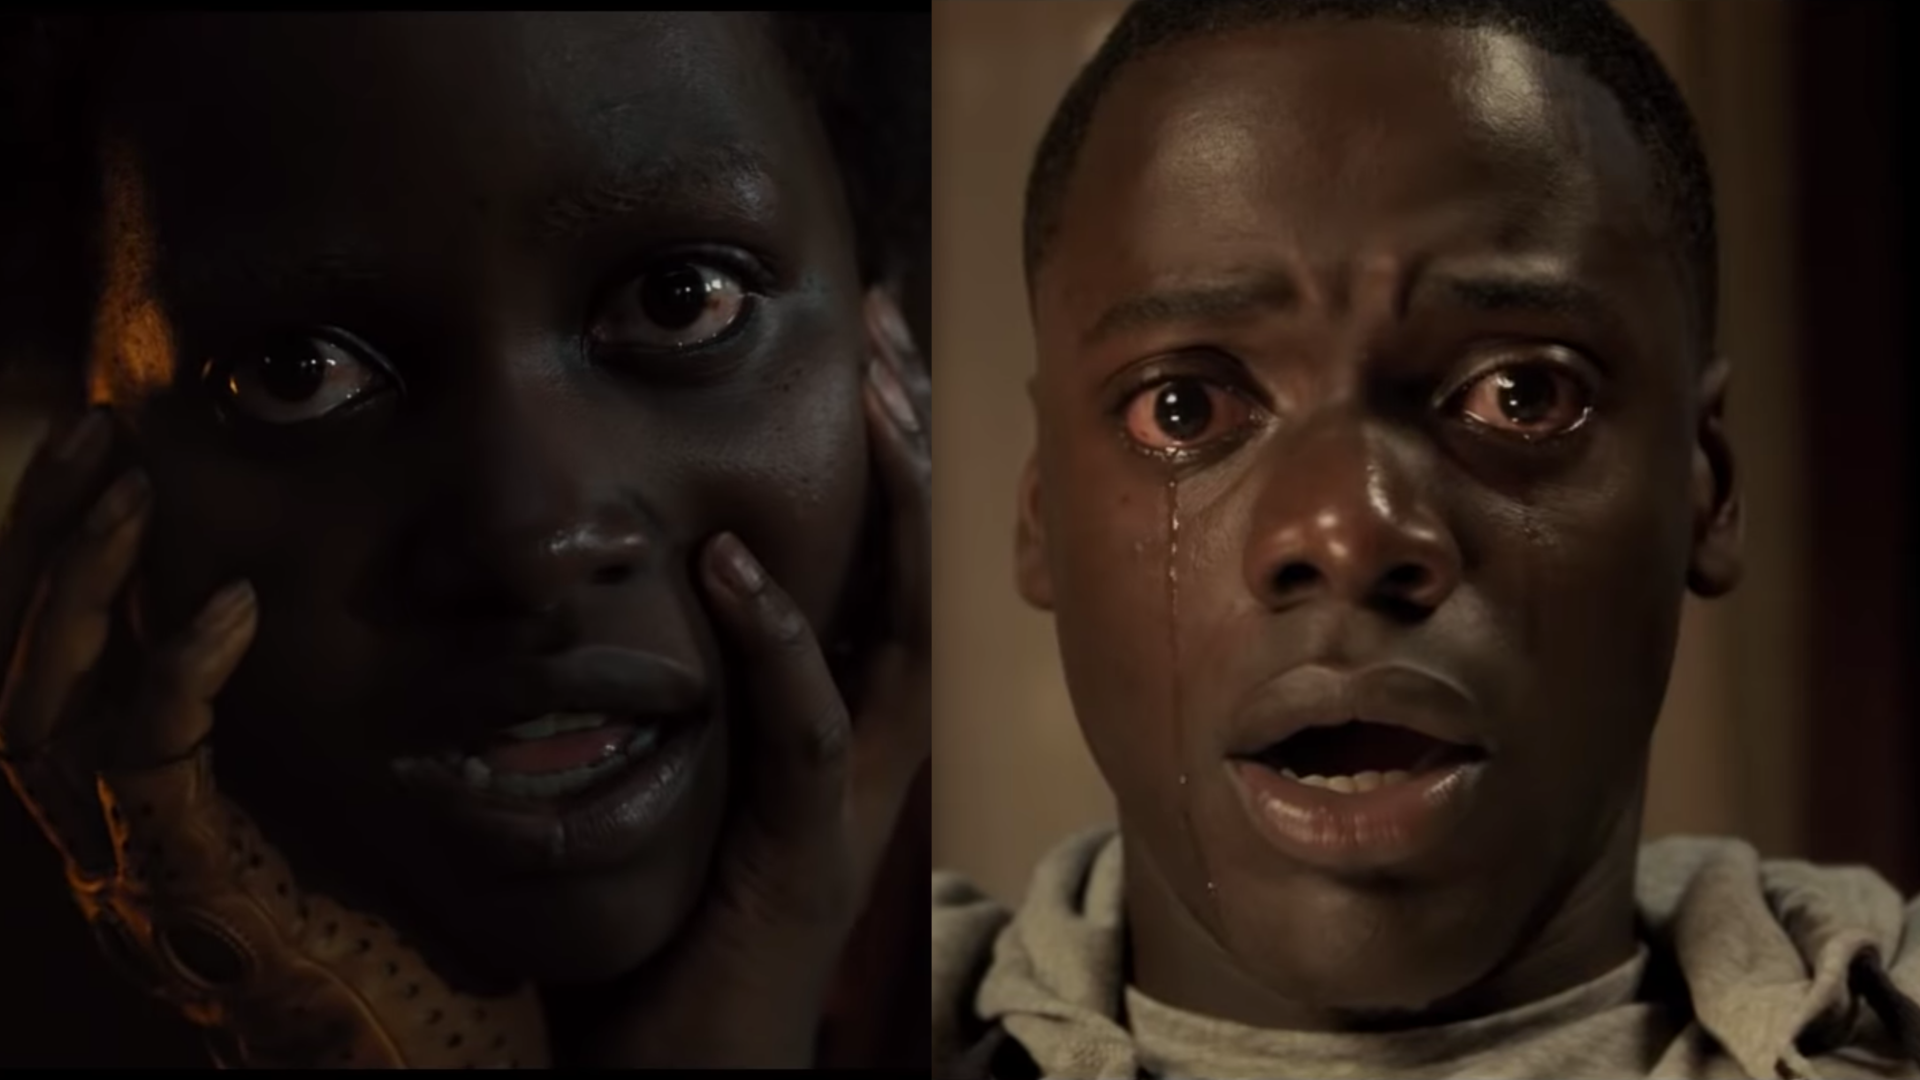 Two headshots of the main characters from the films Get Out and Us.